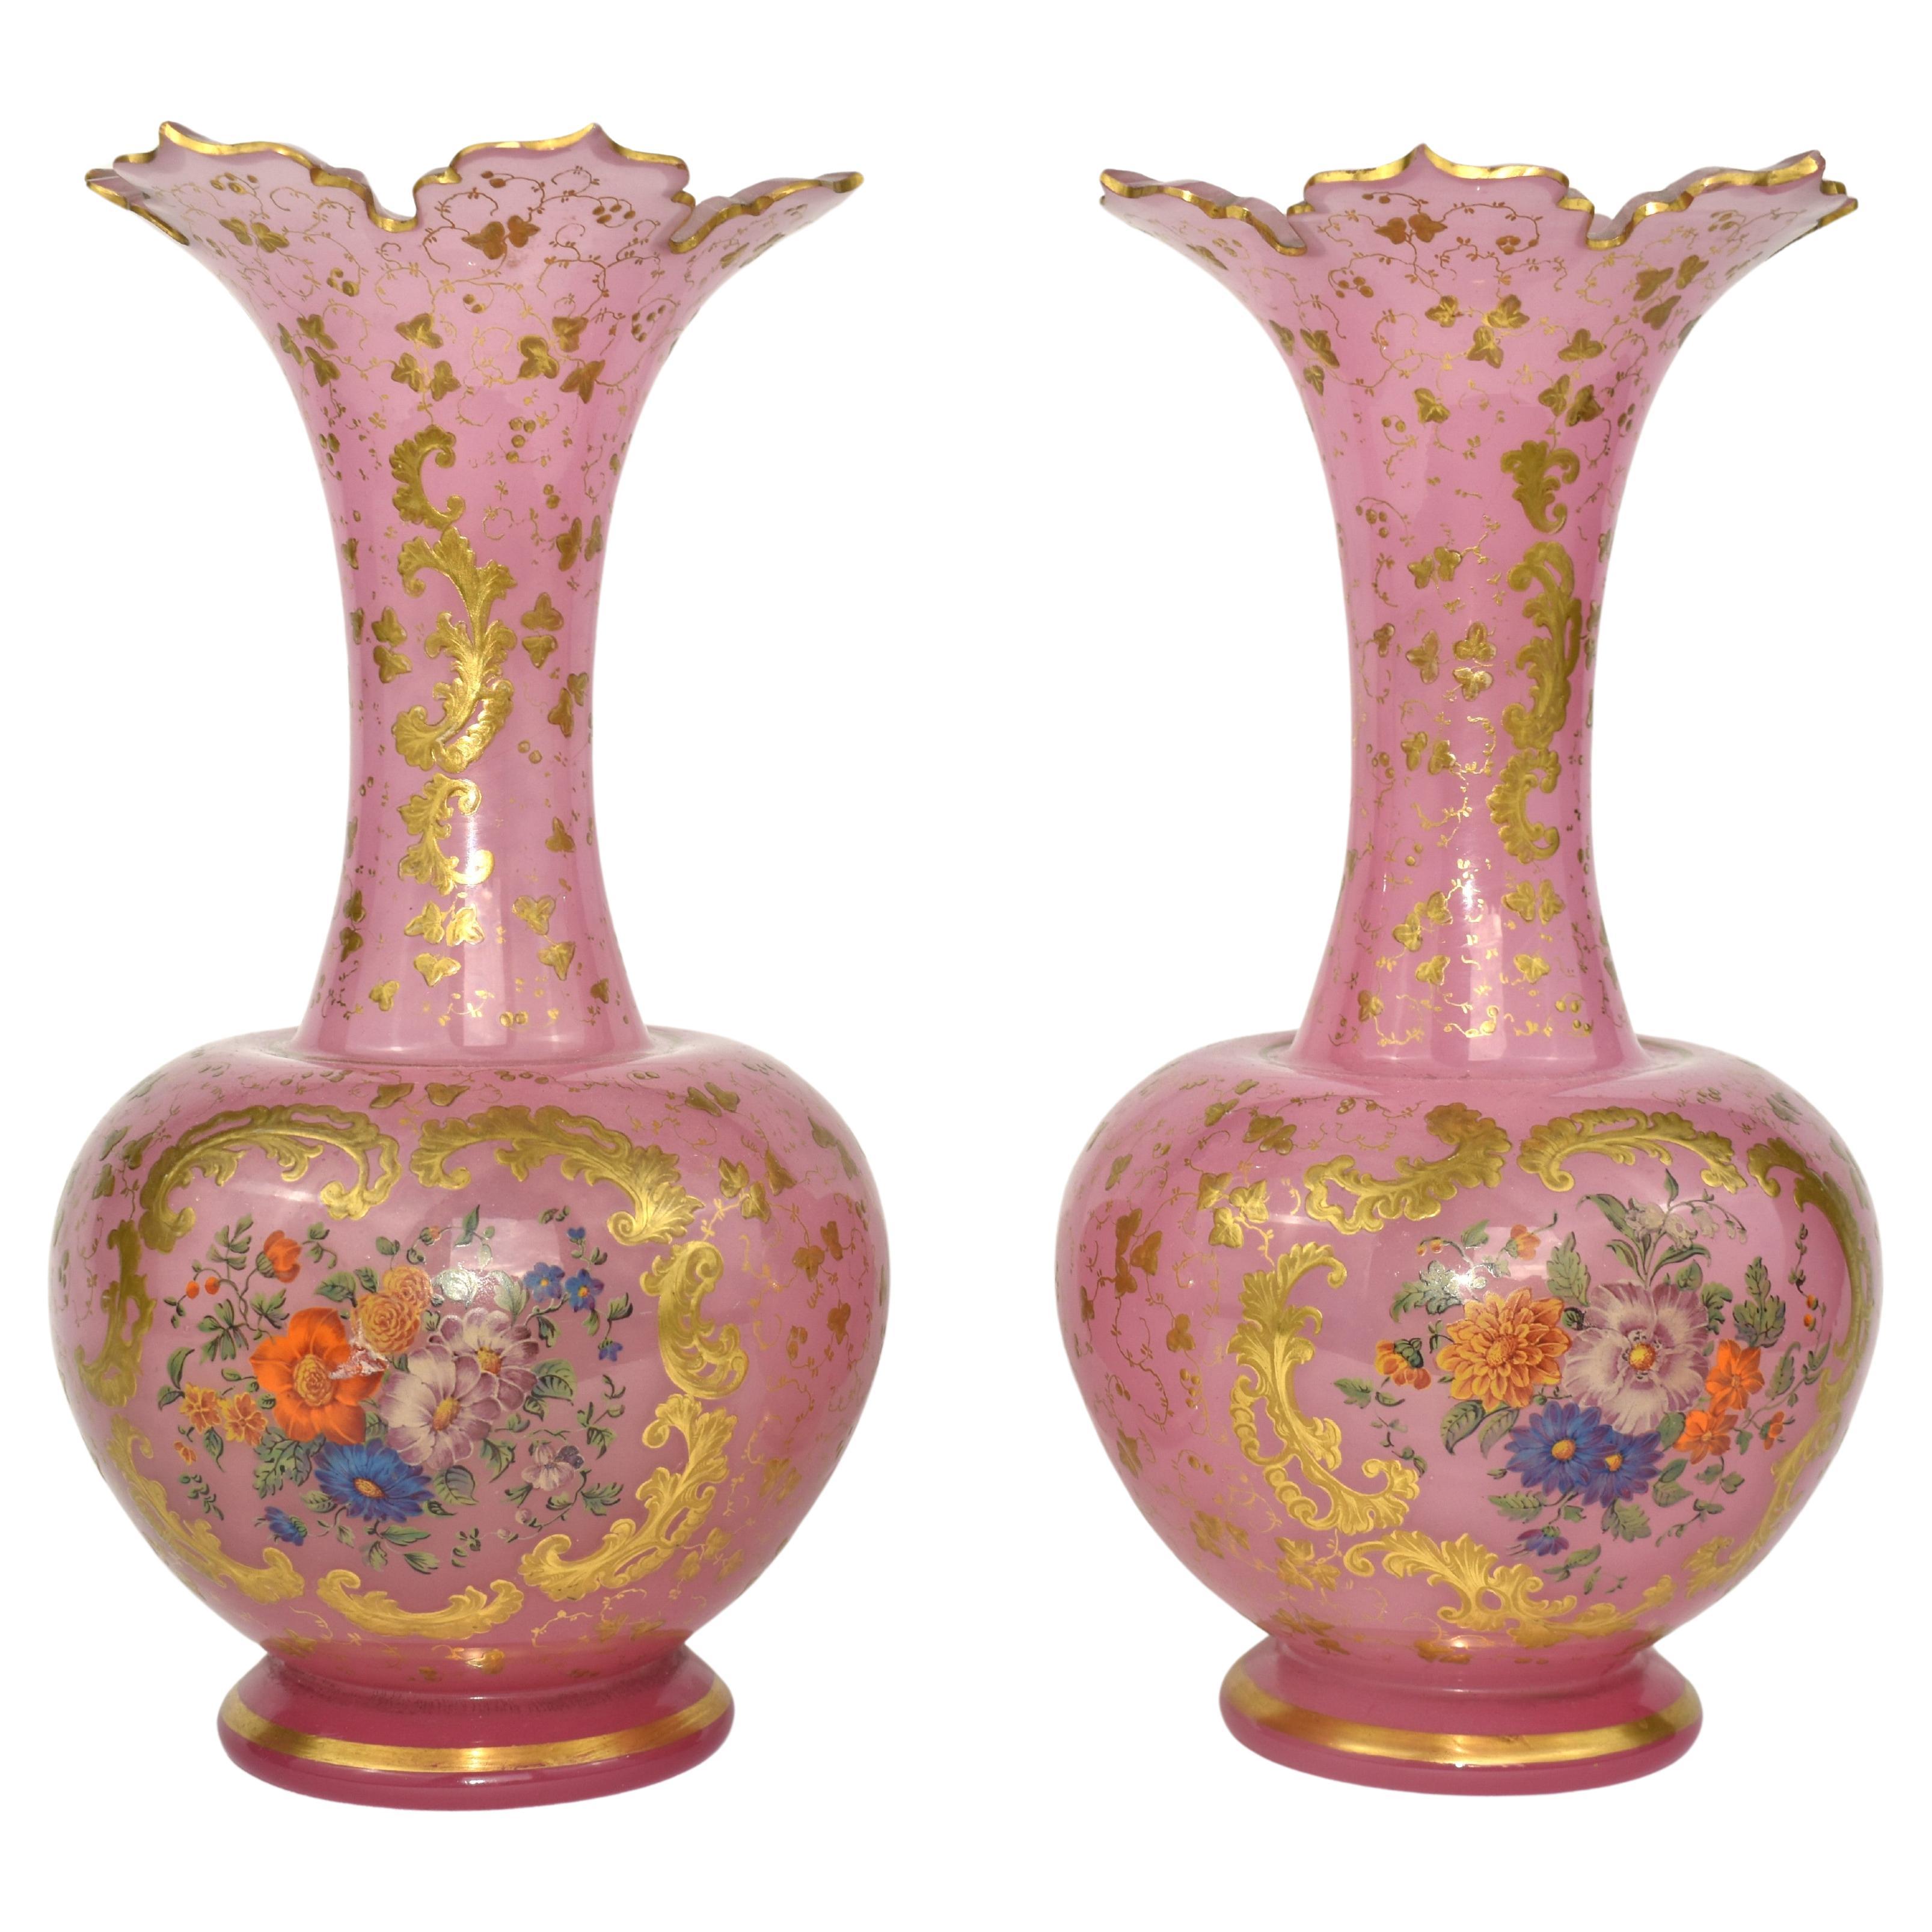 Antique Pair of  Bohemian Opaline Enamelled Glass Vases, 19th Century In Good Condition For Sale In Rostock, MV